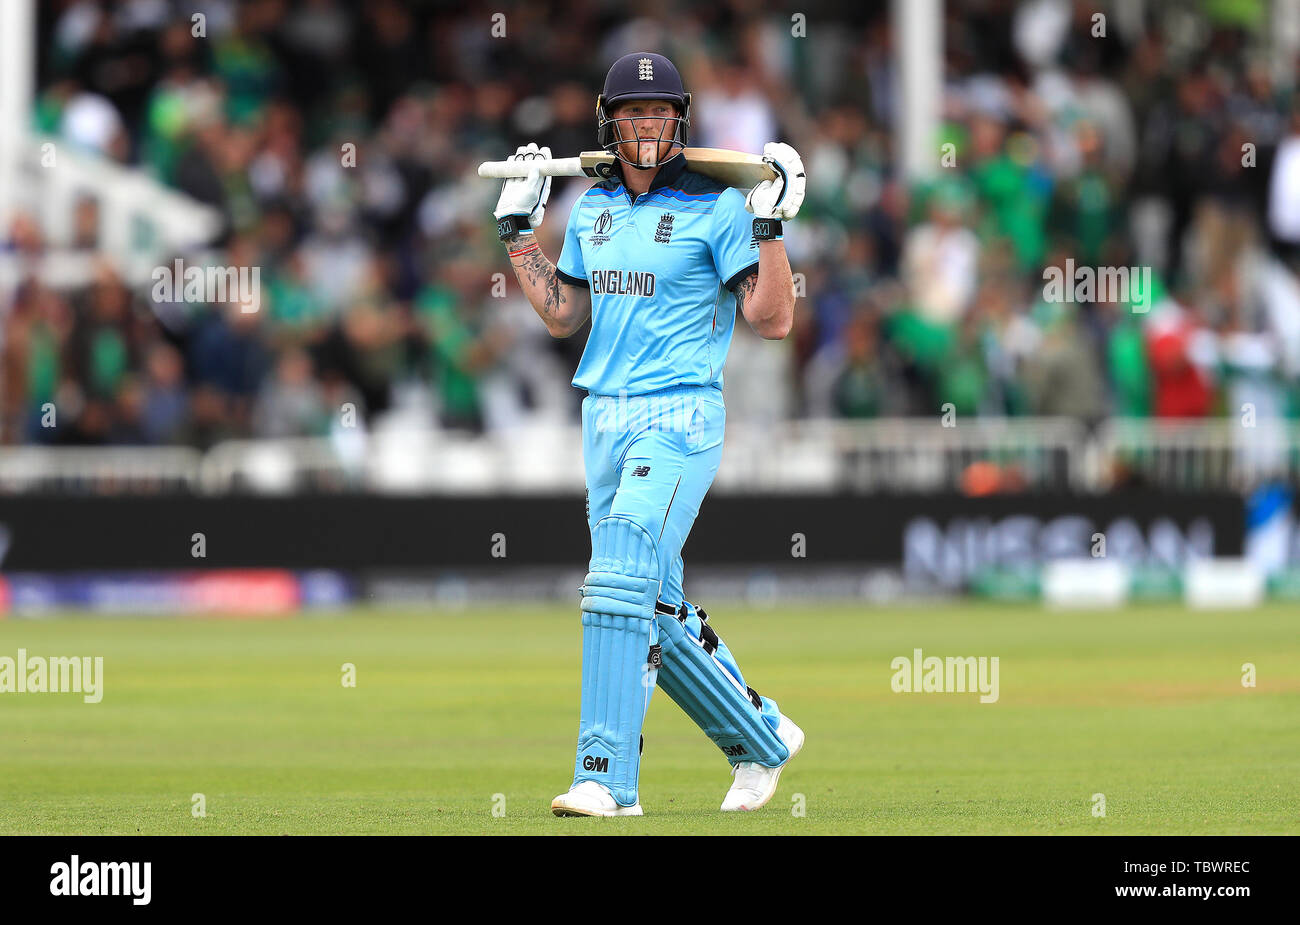 England's Ben Stokes walks off after being dismissed during the ICC Cricket World Cup group stage match at Trent Bridge, Nottingham. Stock Photo